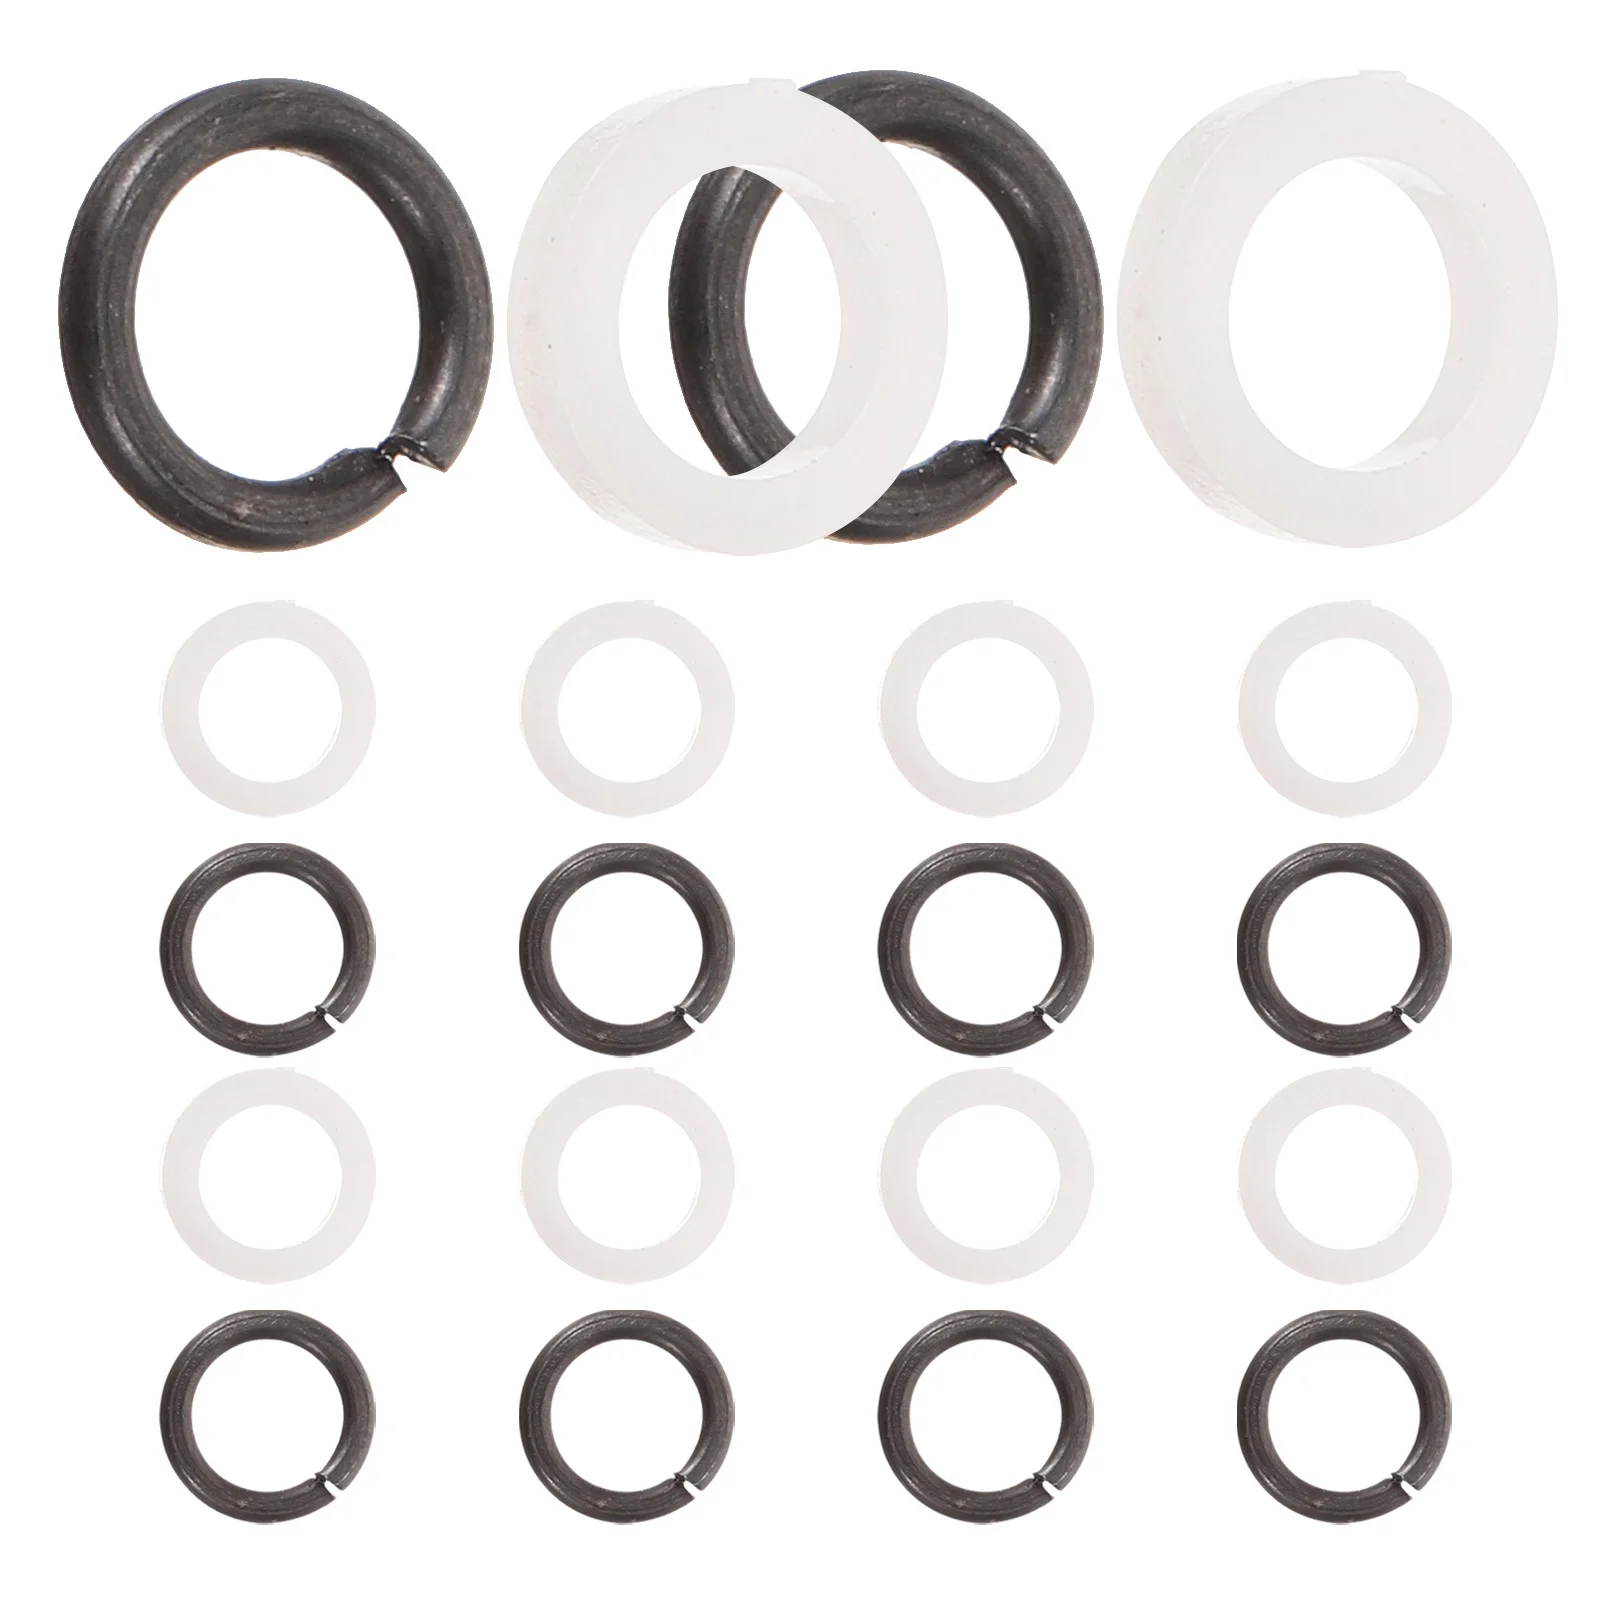 

10 Pairs Guitar Peg Spacer Professional Tuner Washer Replaceable Tuning Gasket for Spacers Washers Gaskets Portable